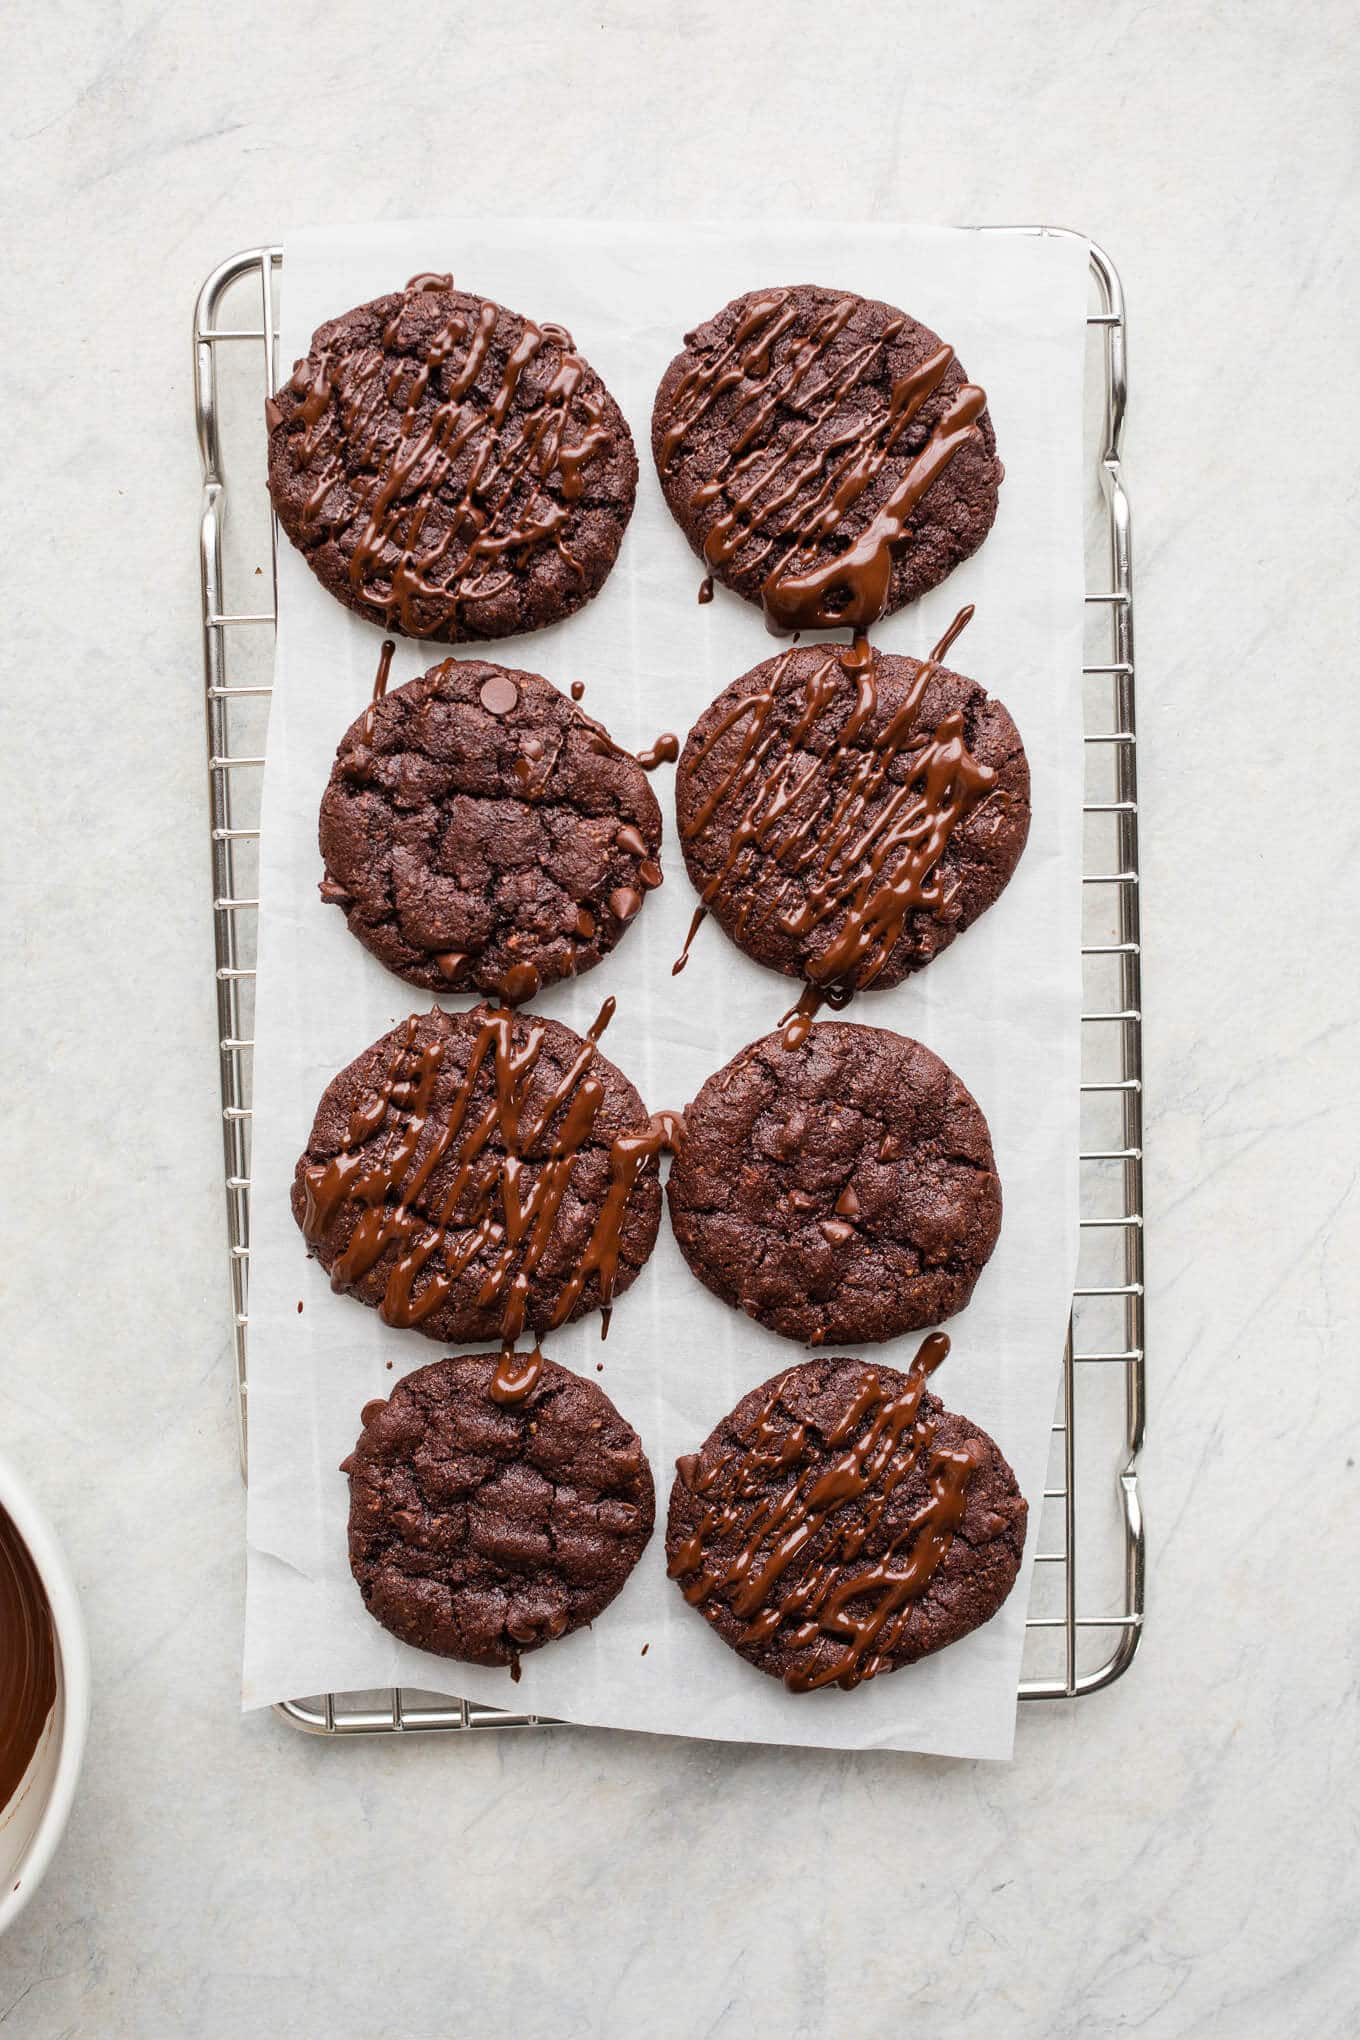 Double Chocolate Chip Hazelnut Cookies made with hazelnut meal, hazelnut butter, cocoa powder, and organic dark chocolate chips for a truly decadent cookie. Gluten-free, grain-free, vegan. 